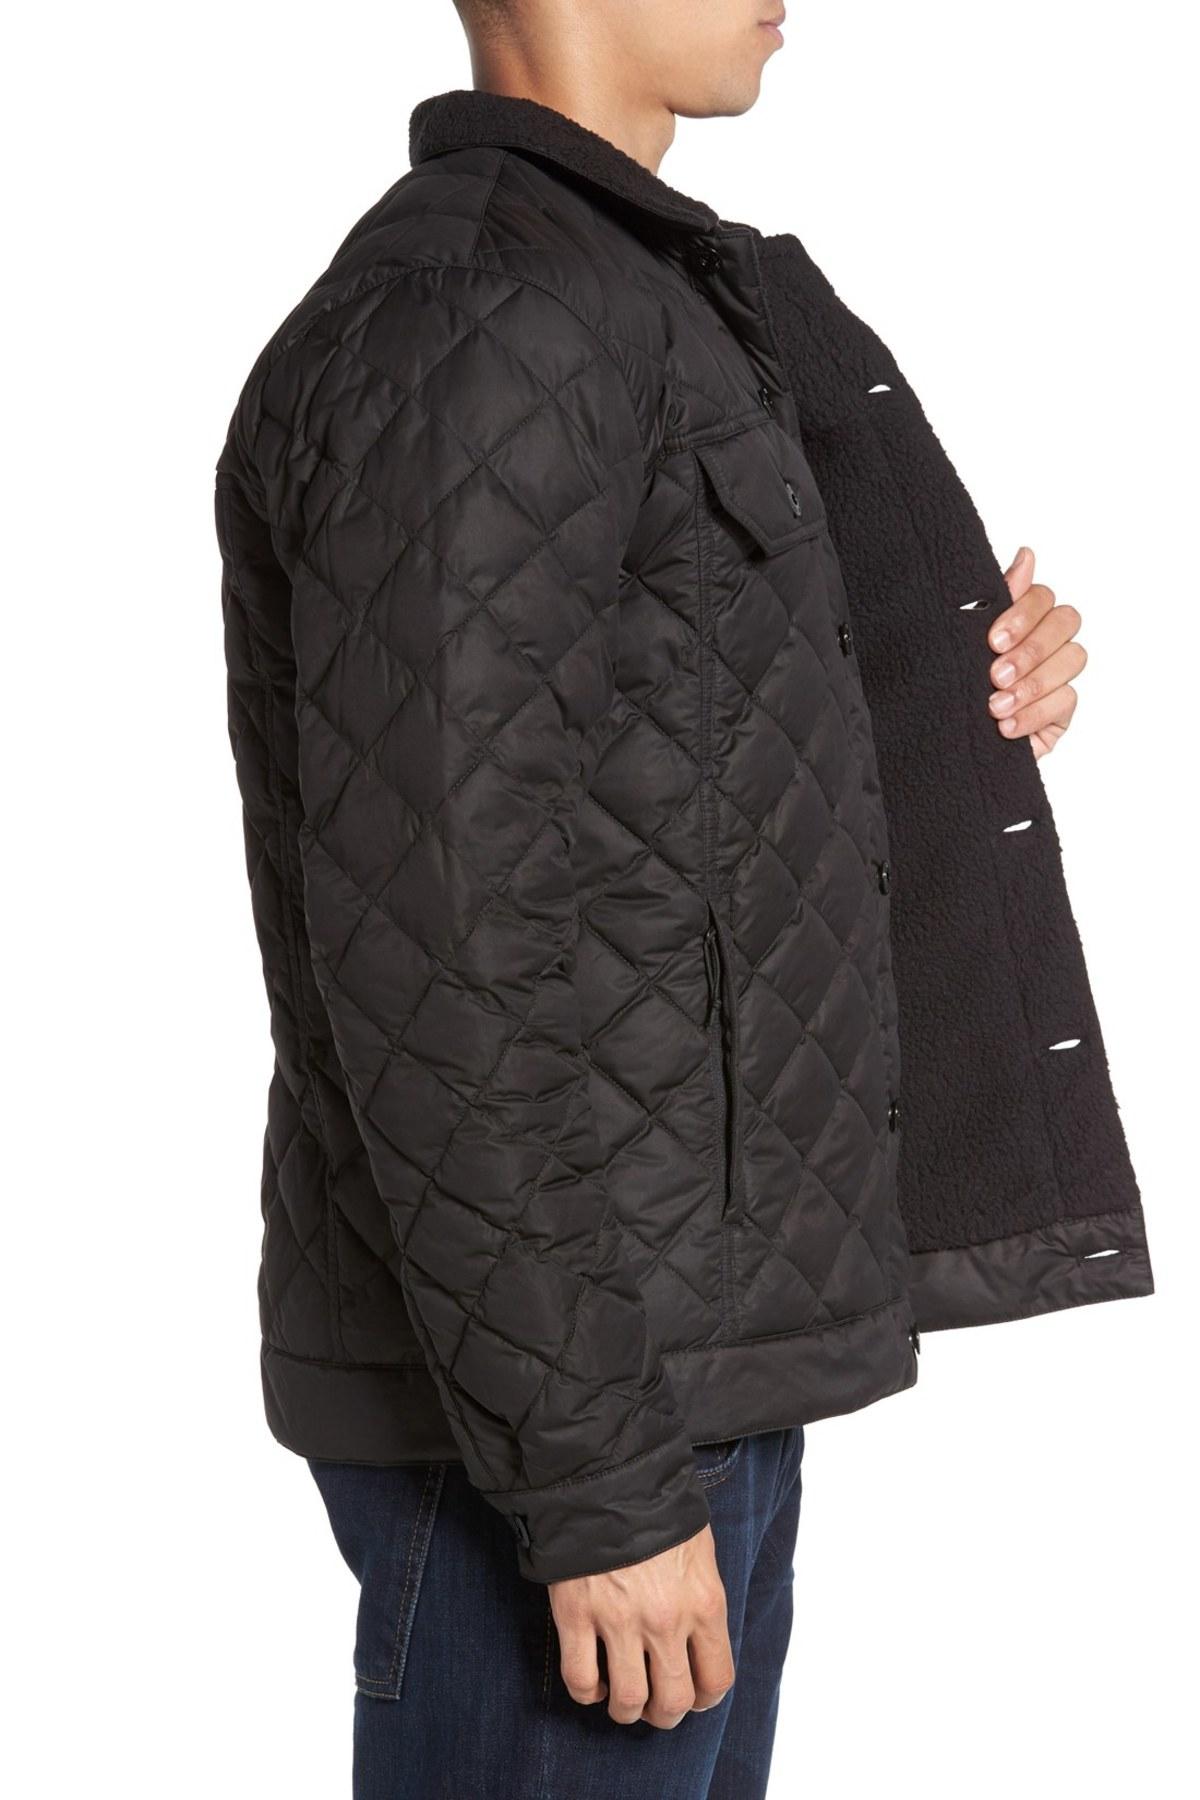 The North Face Sherpa Fleece Lined Quilted Jacket in Black for Men - Lyst